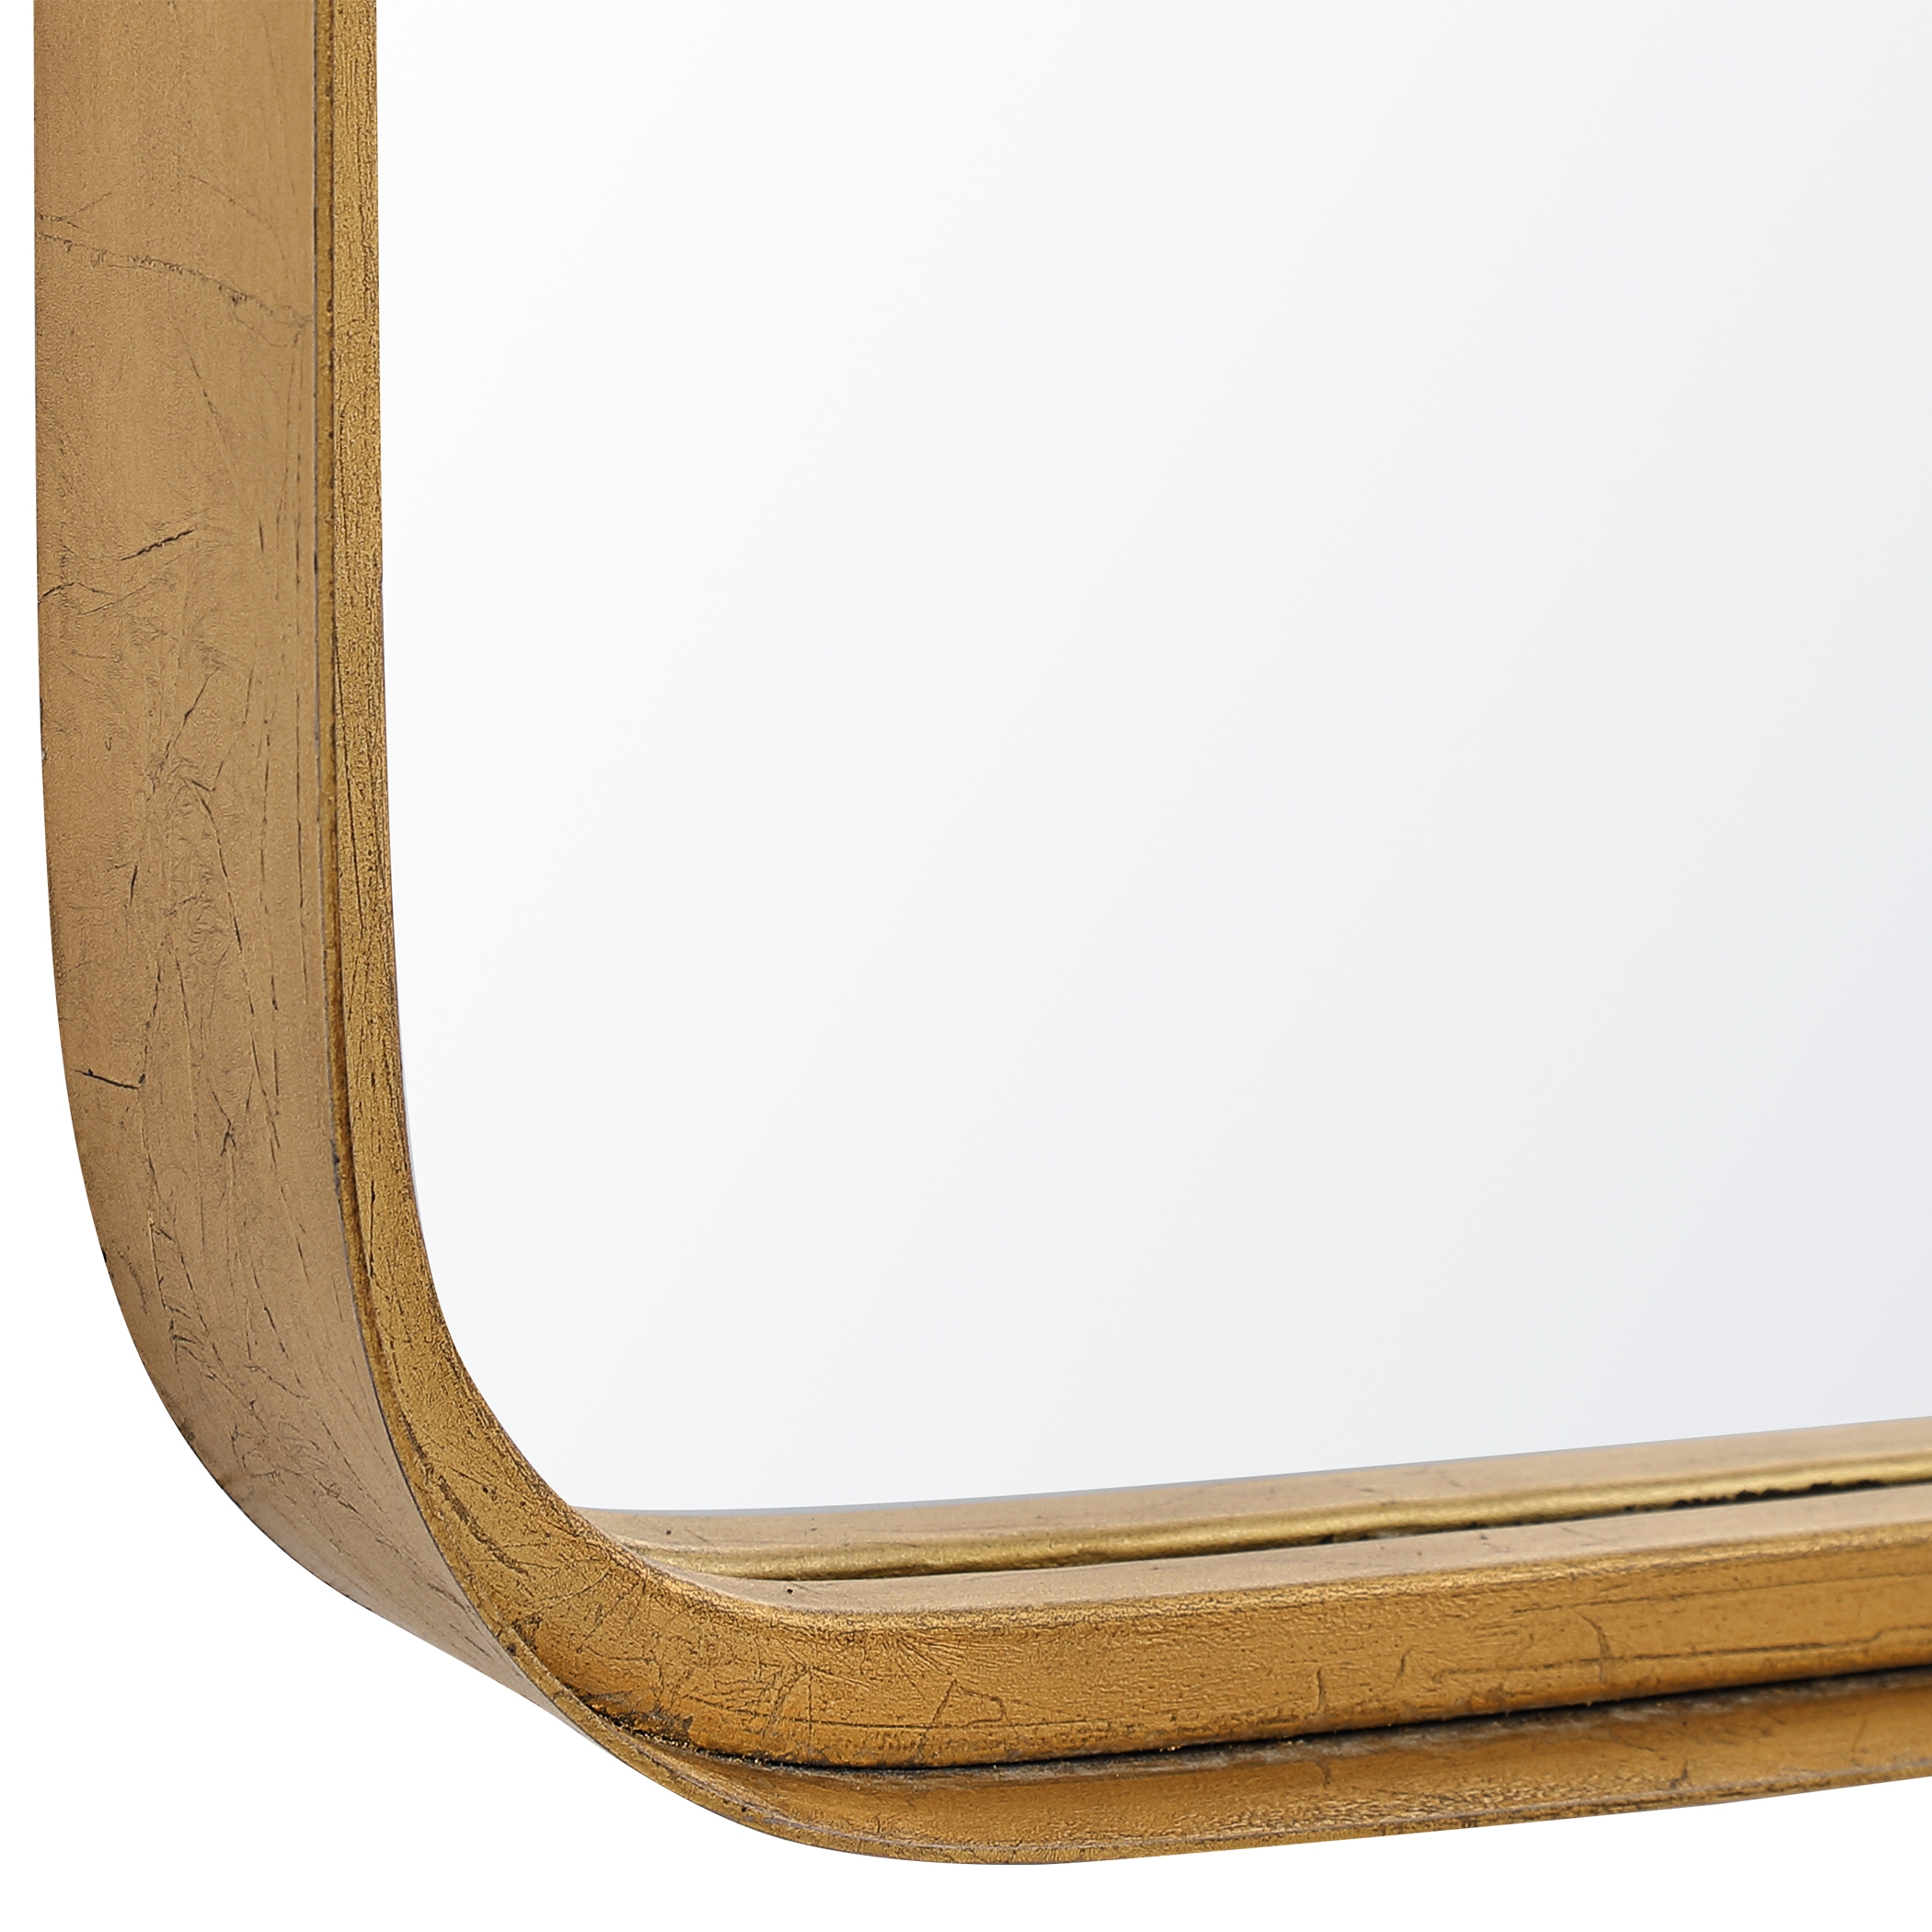 Rounded Corners Mirror - Image 4